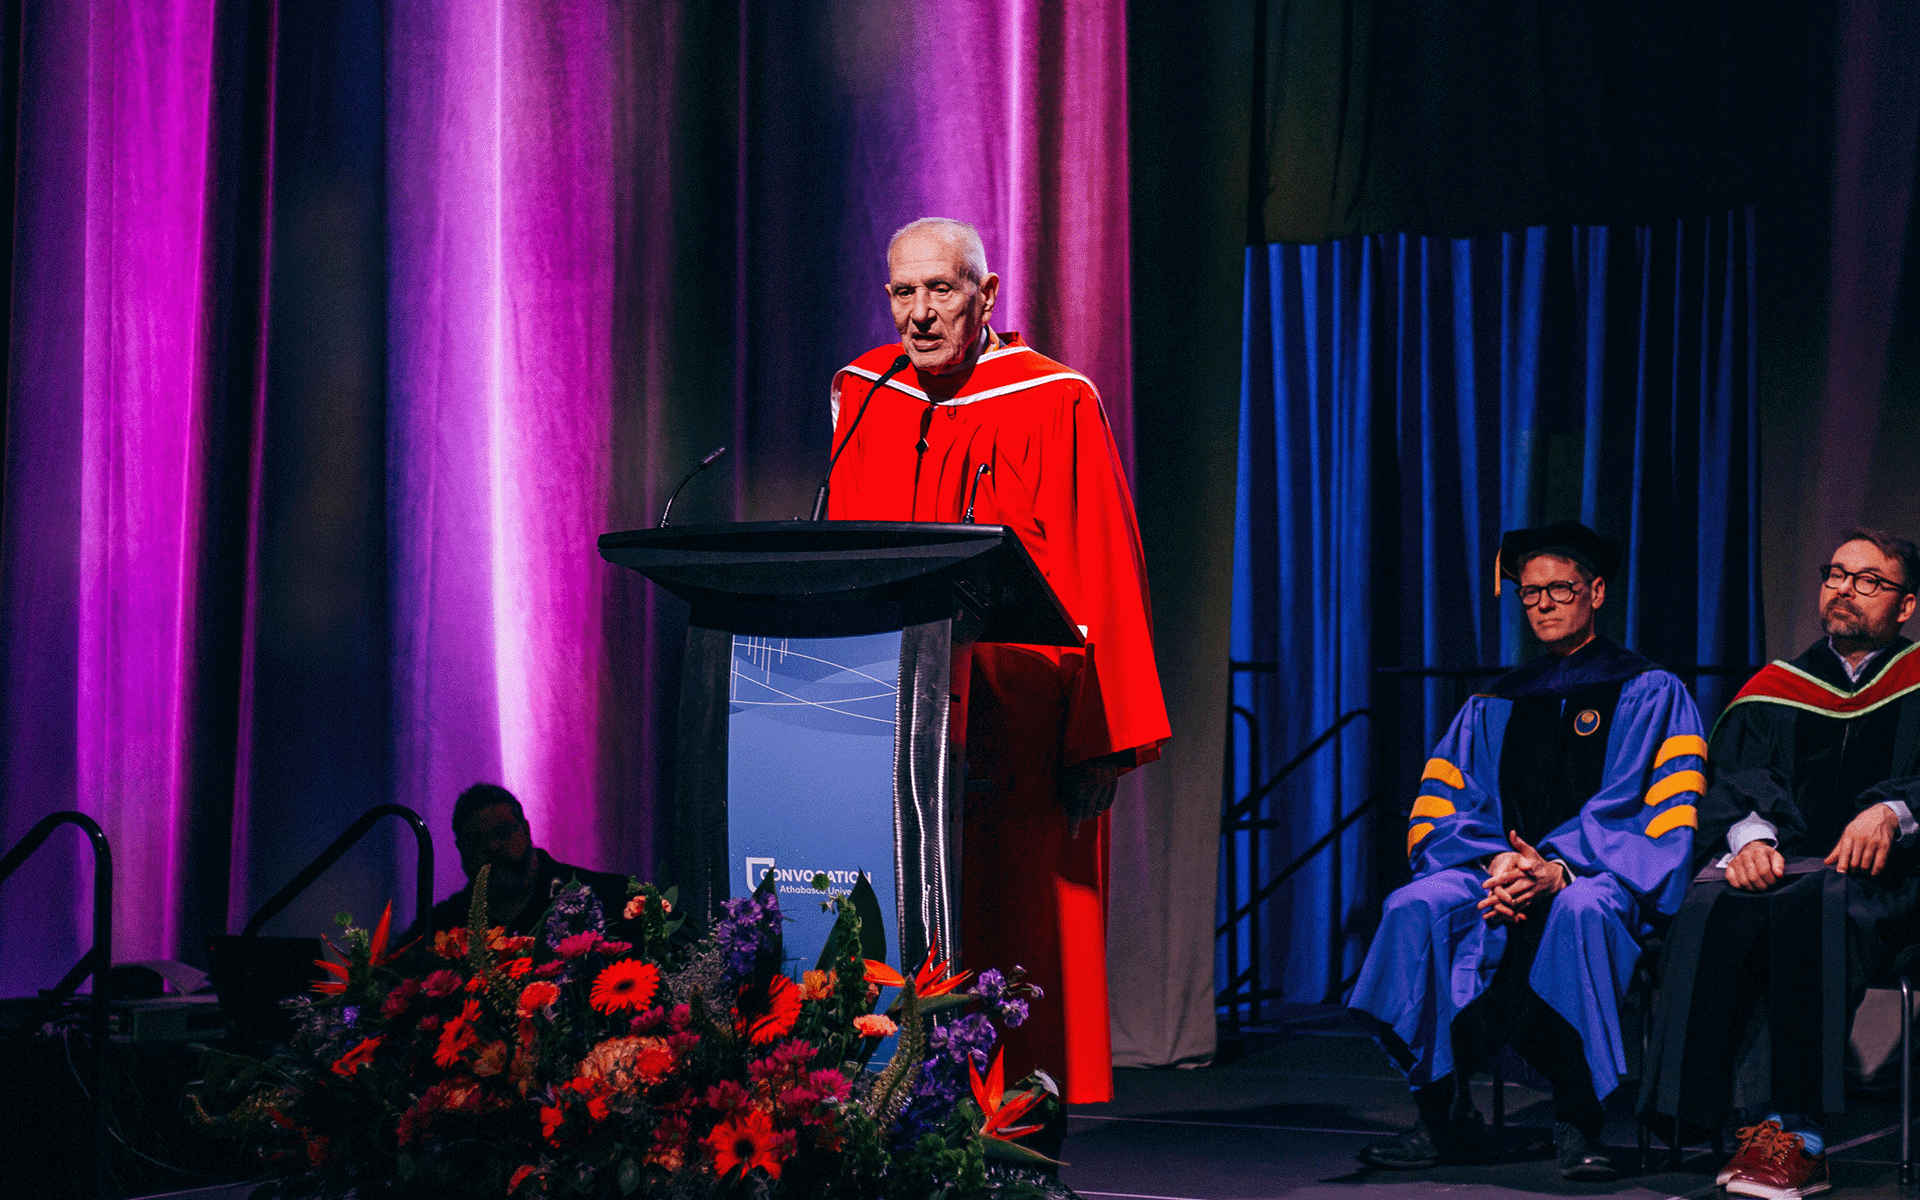 Douglas J. Cardinal receiving Honorary Doctor of Laws, image is focused on older man standing at the podium